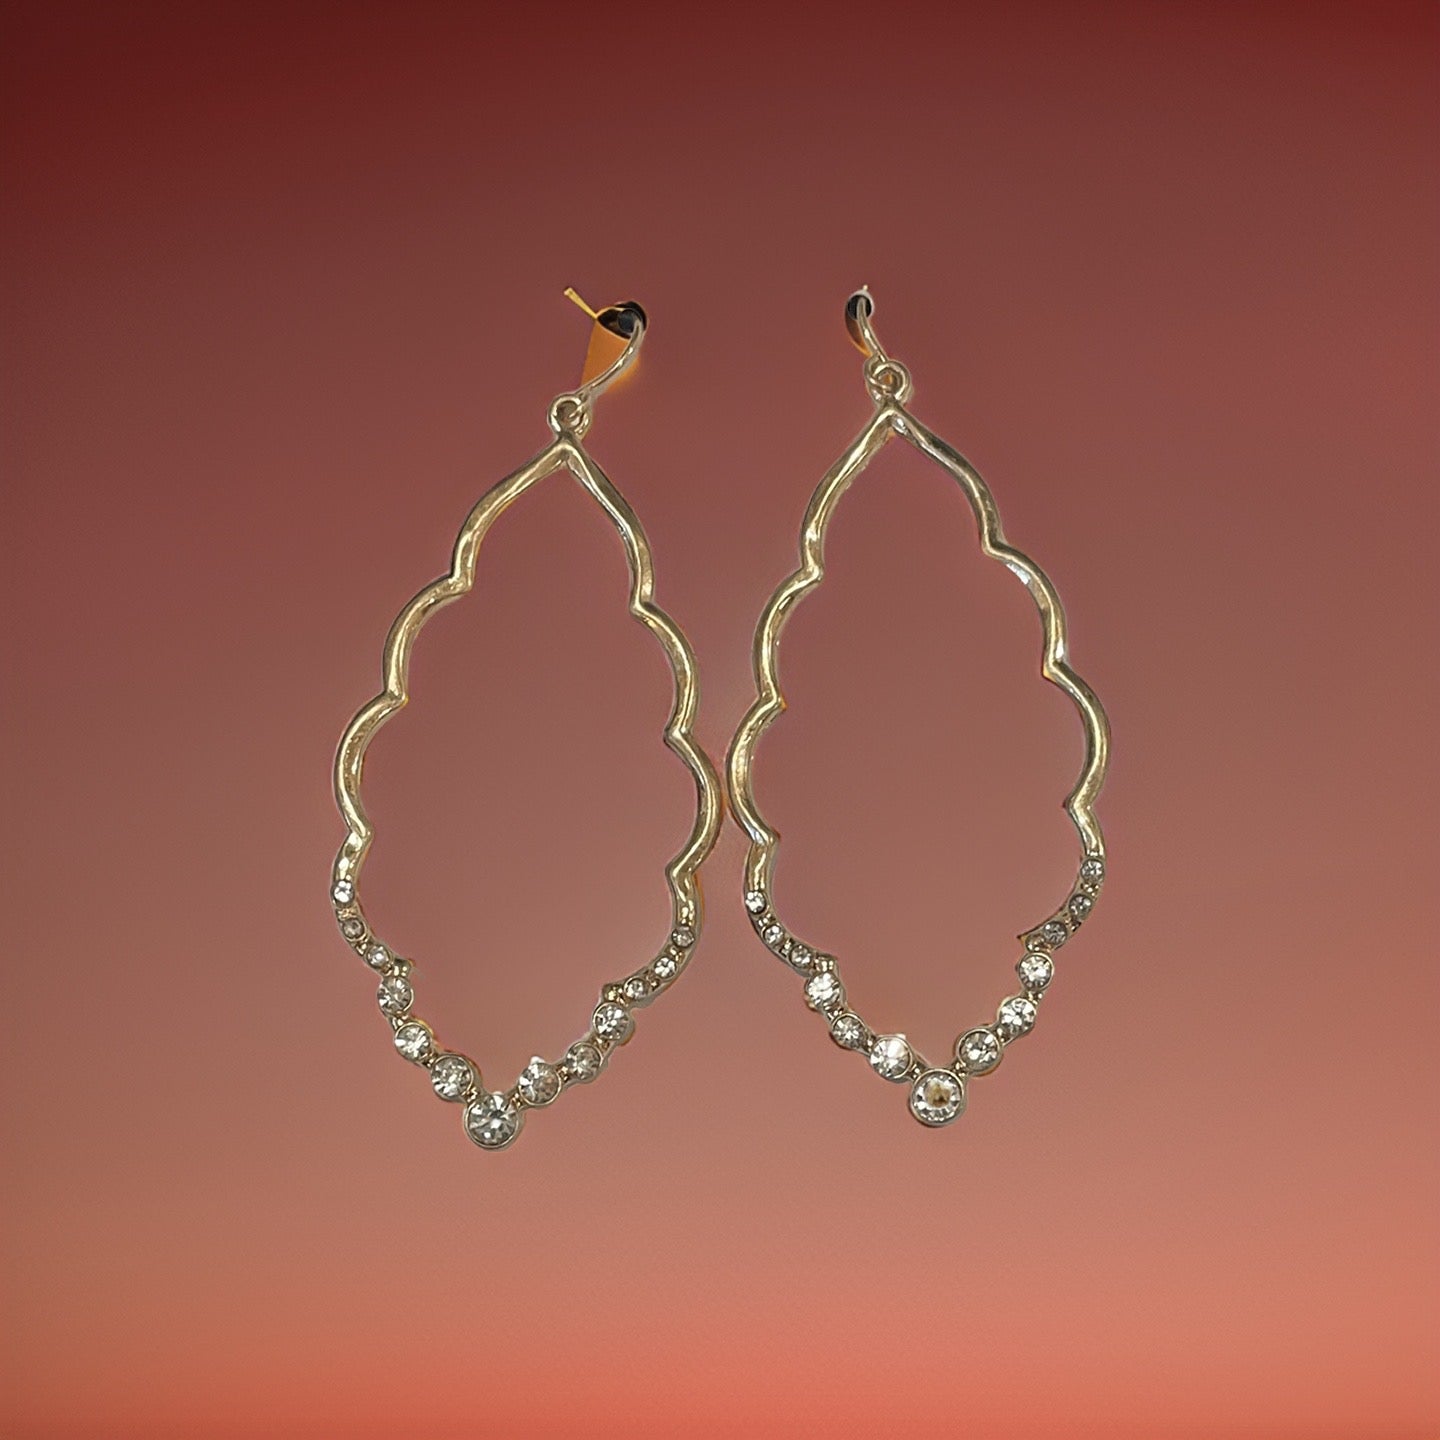 Vintage Frame Earrings with Rhinestones - Available in Silver & Gold